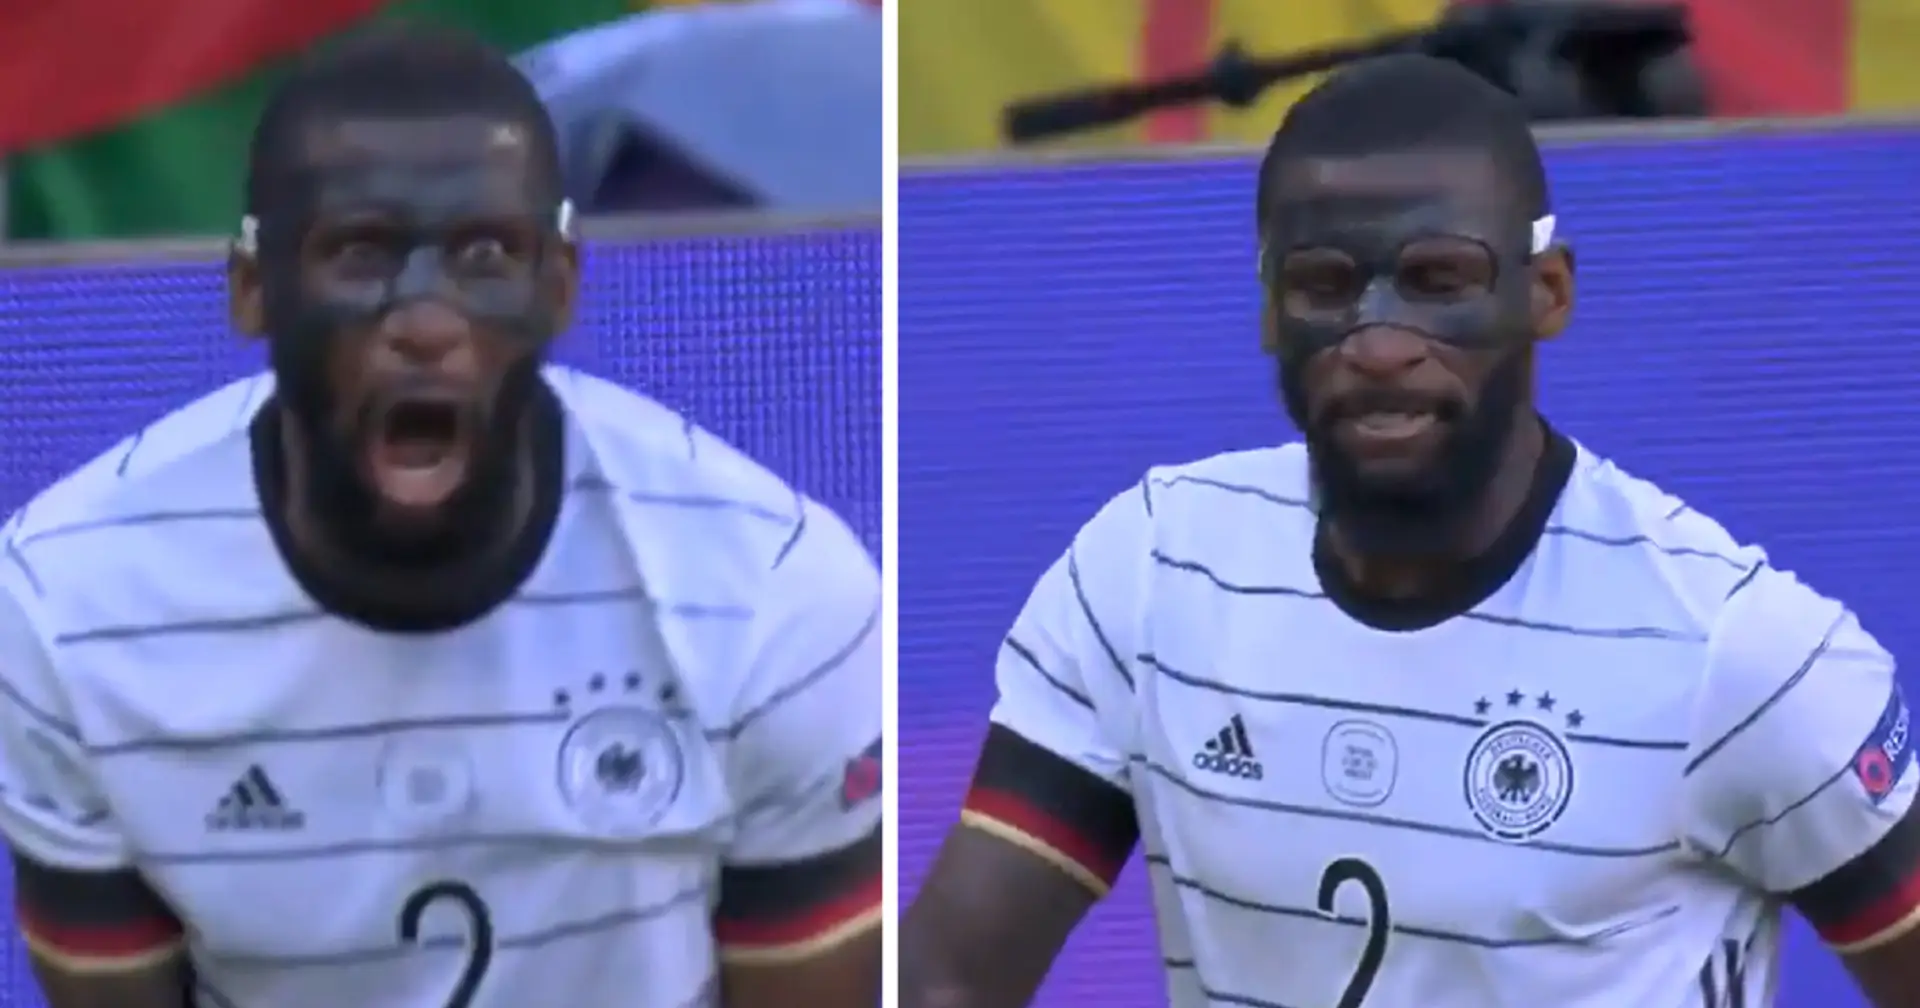 Warrior: Rudiger's emotional reaction during Germany's 4-2 win - spotted